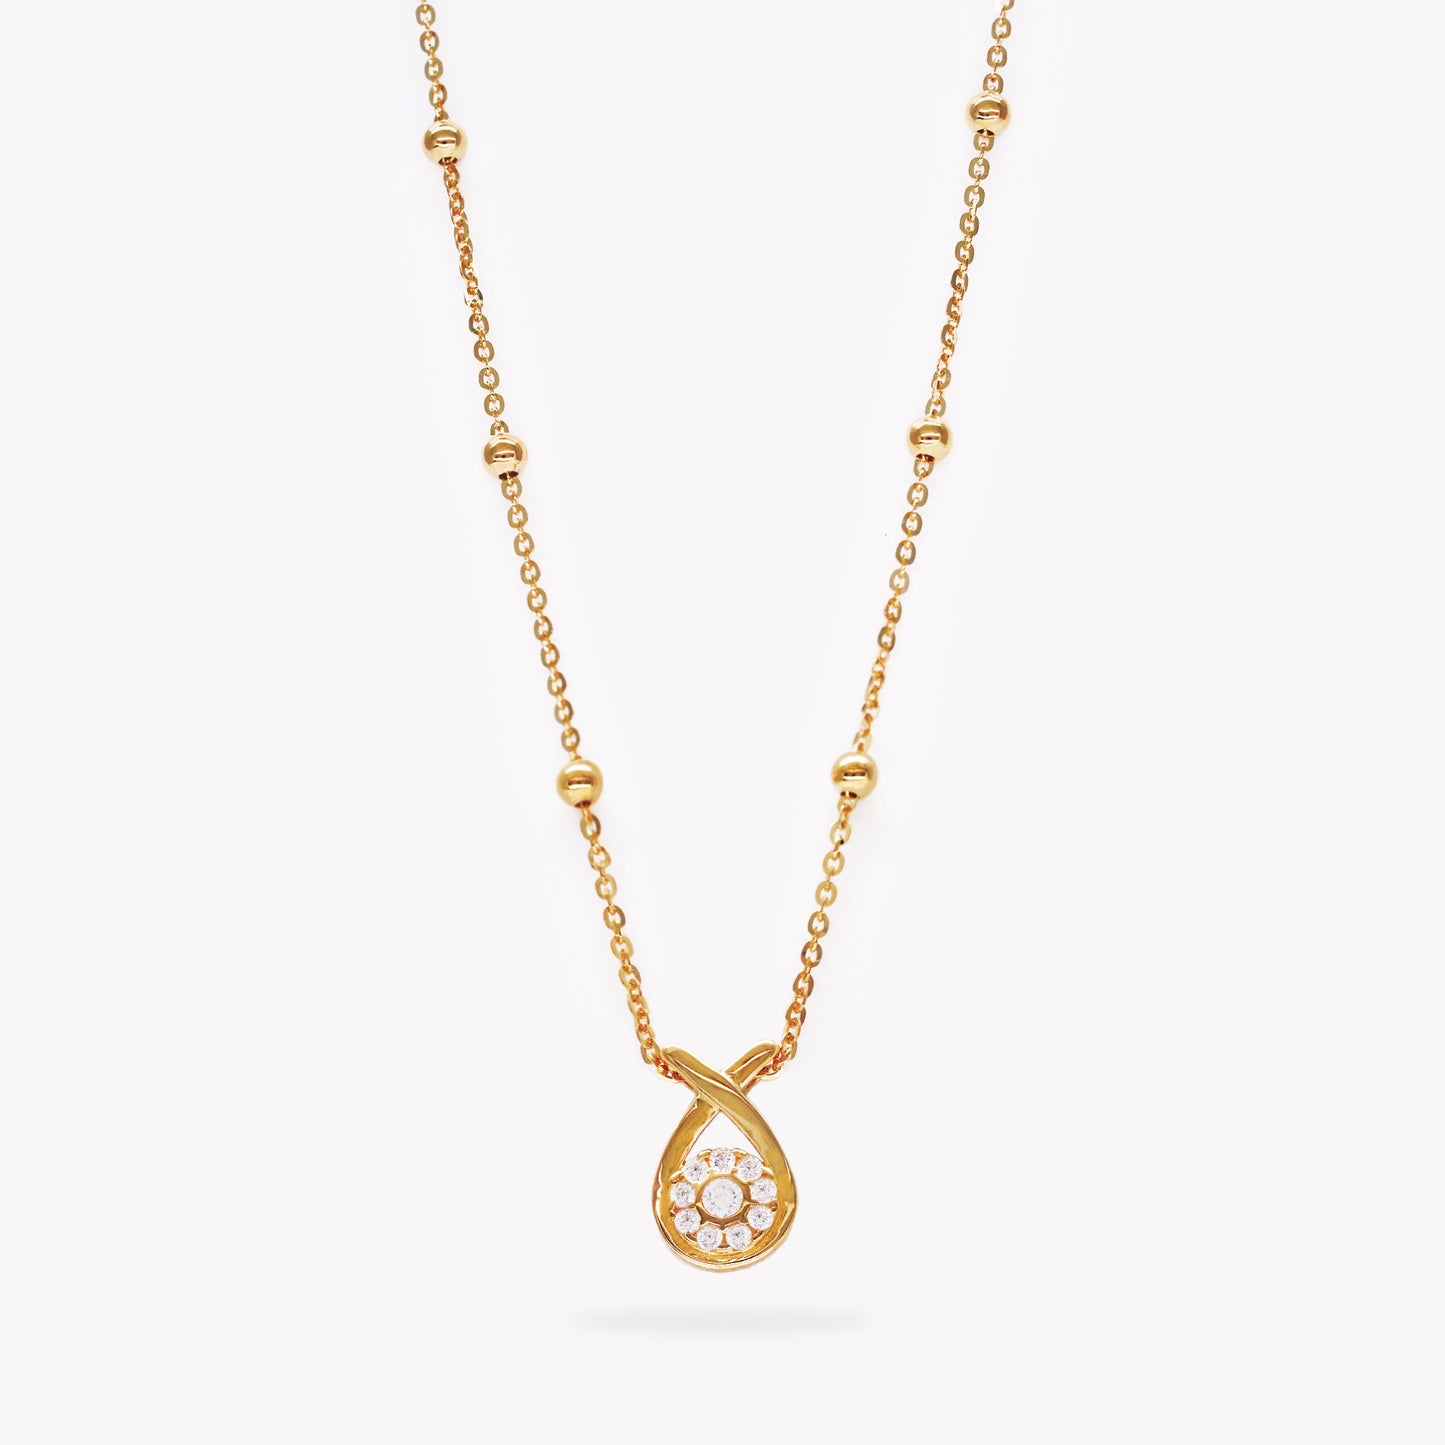 Meira Droplets Necklace